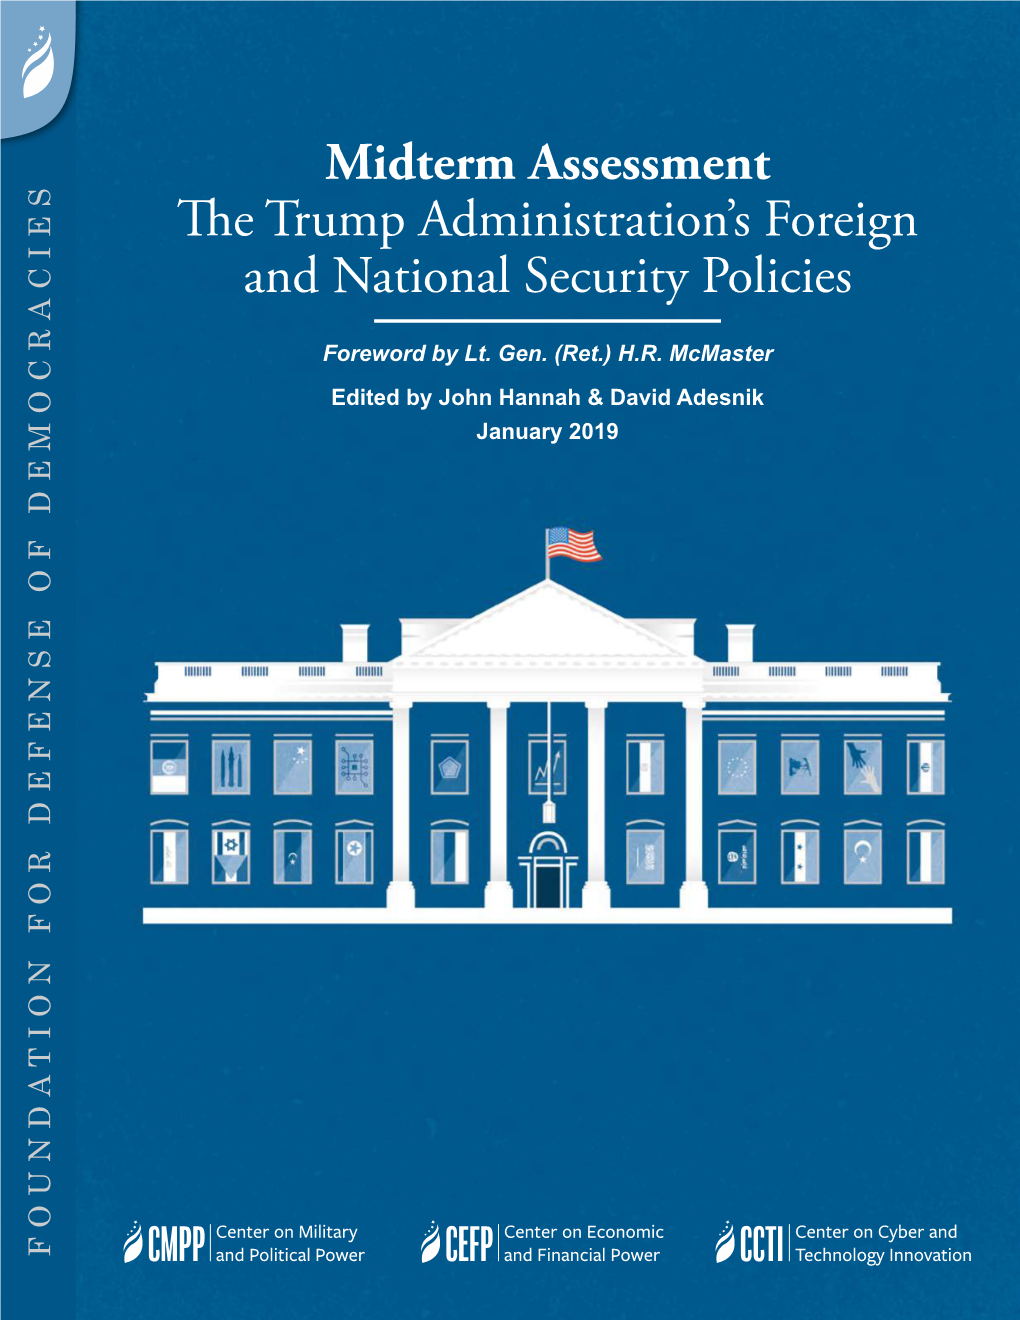 Midterm Assessment the Trump Administration's Foreign And